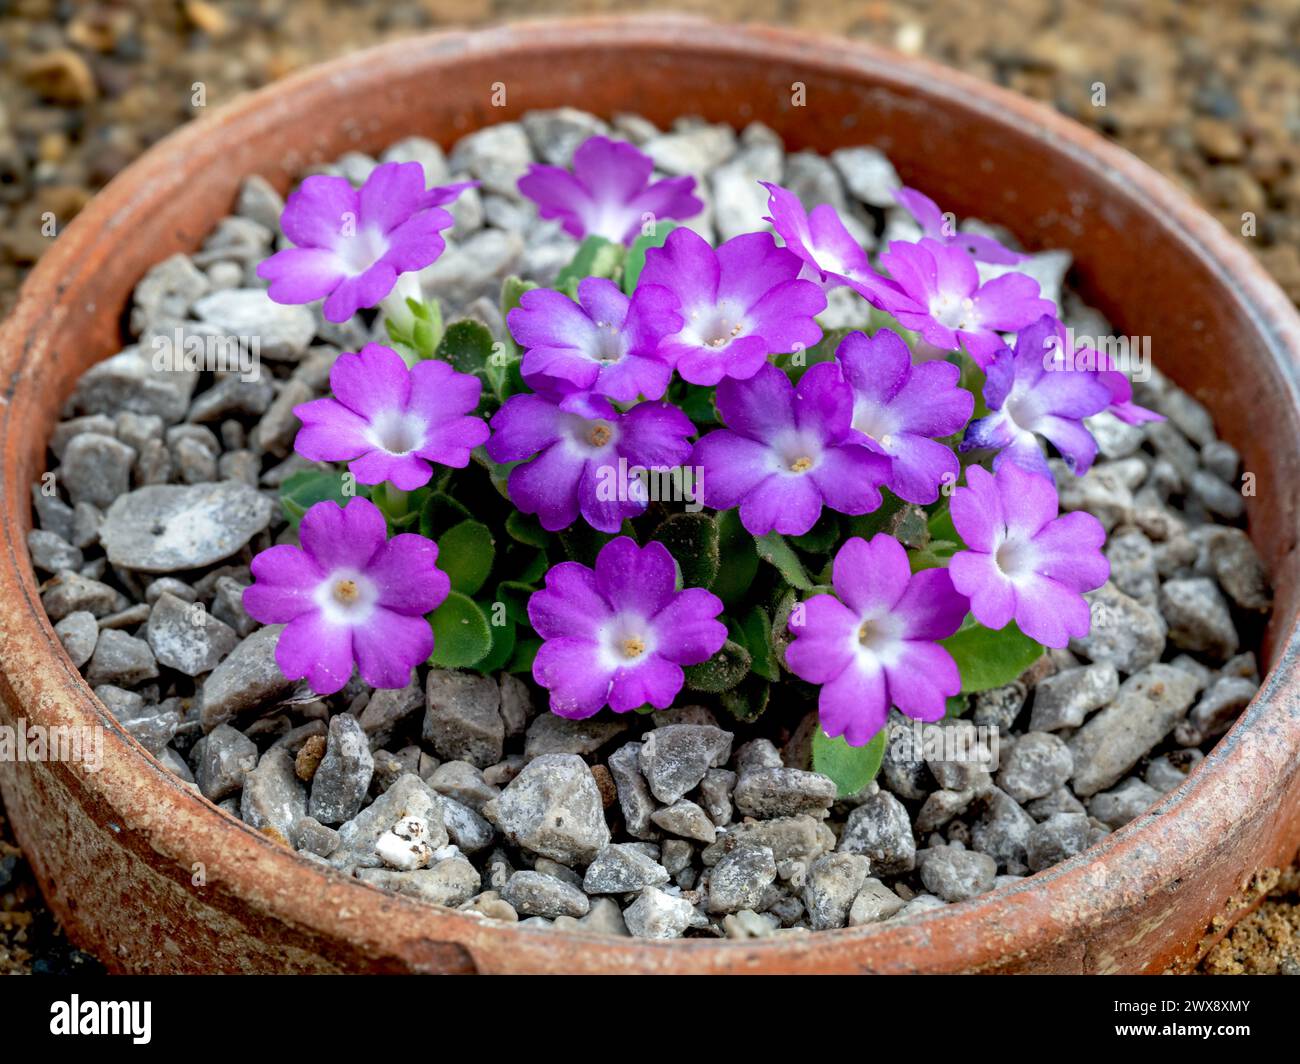 Purple flowers of Primula allionii Lepus in a clay pot Stock Photo